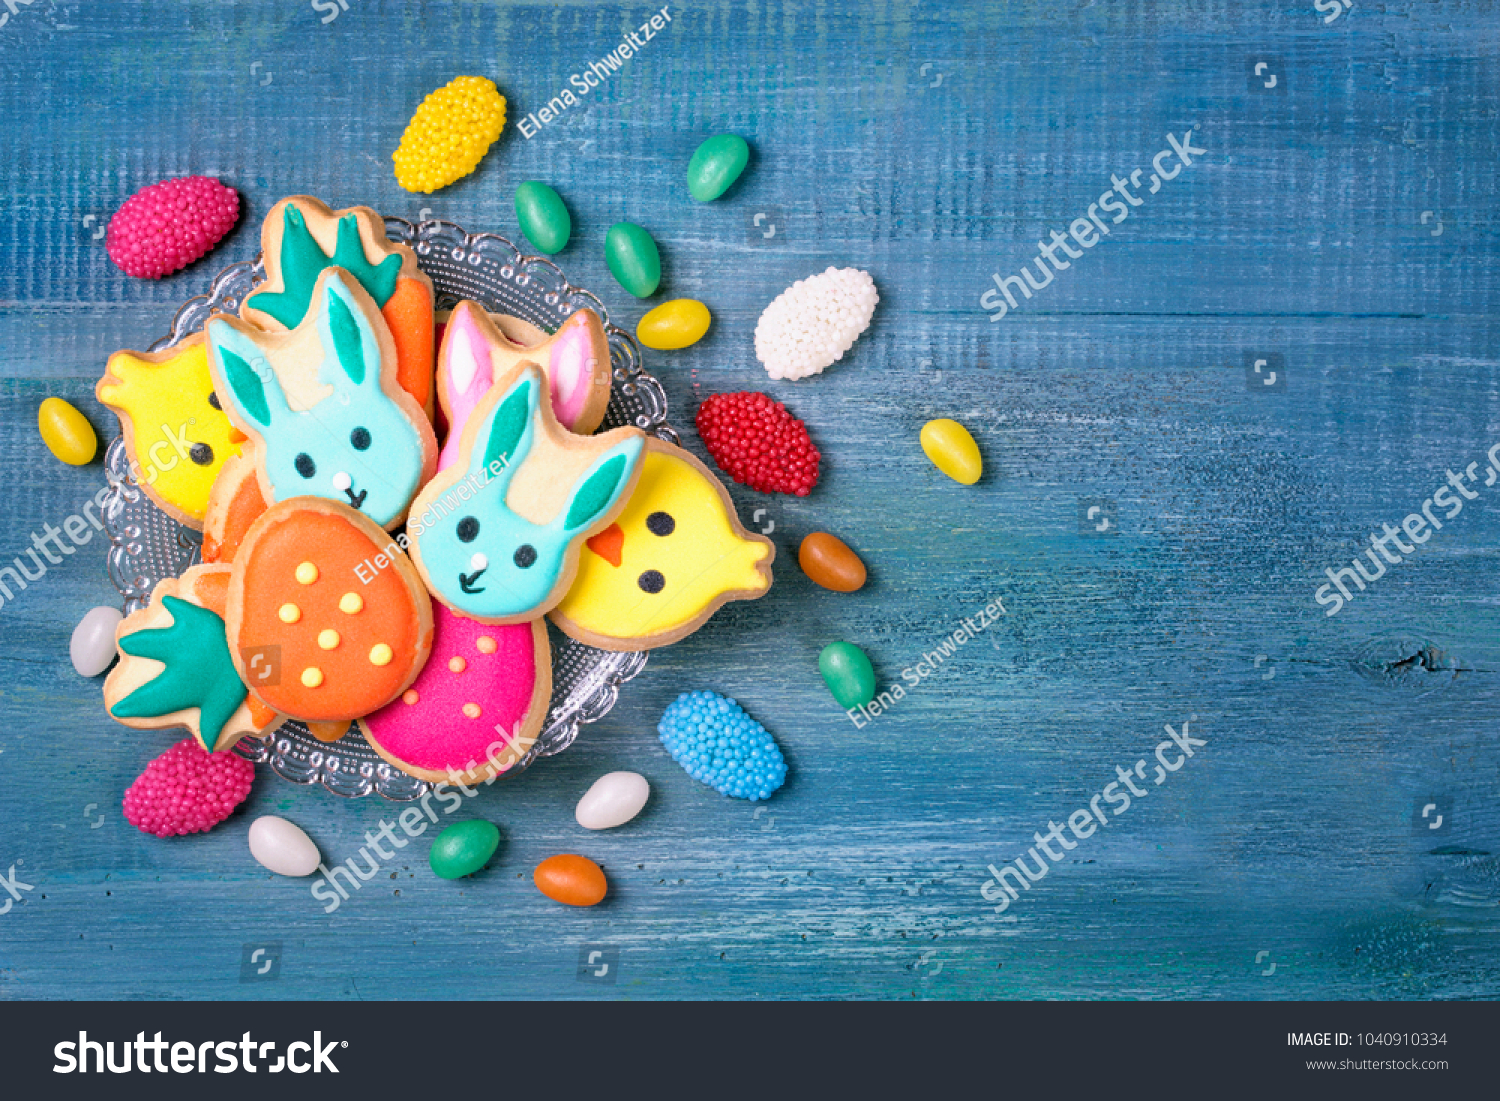 Colorful sweets on a blue wooden background #1040910334